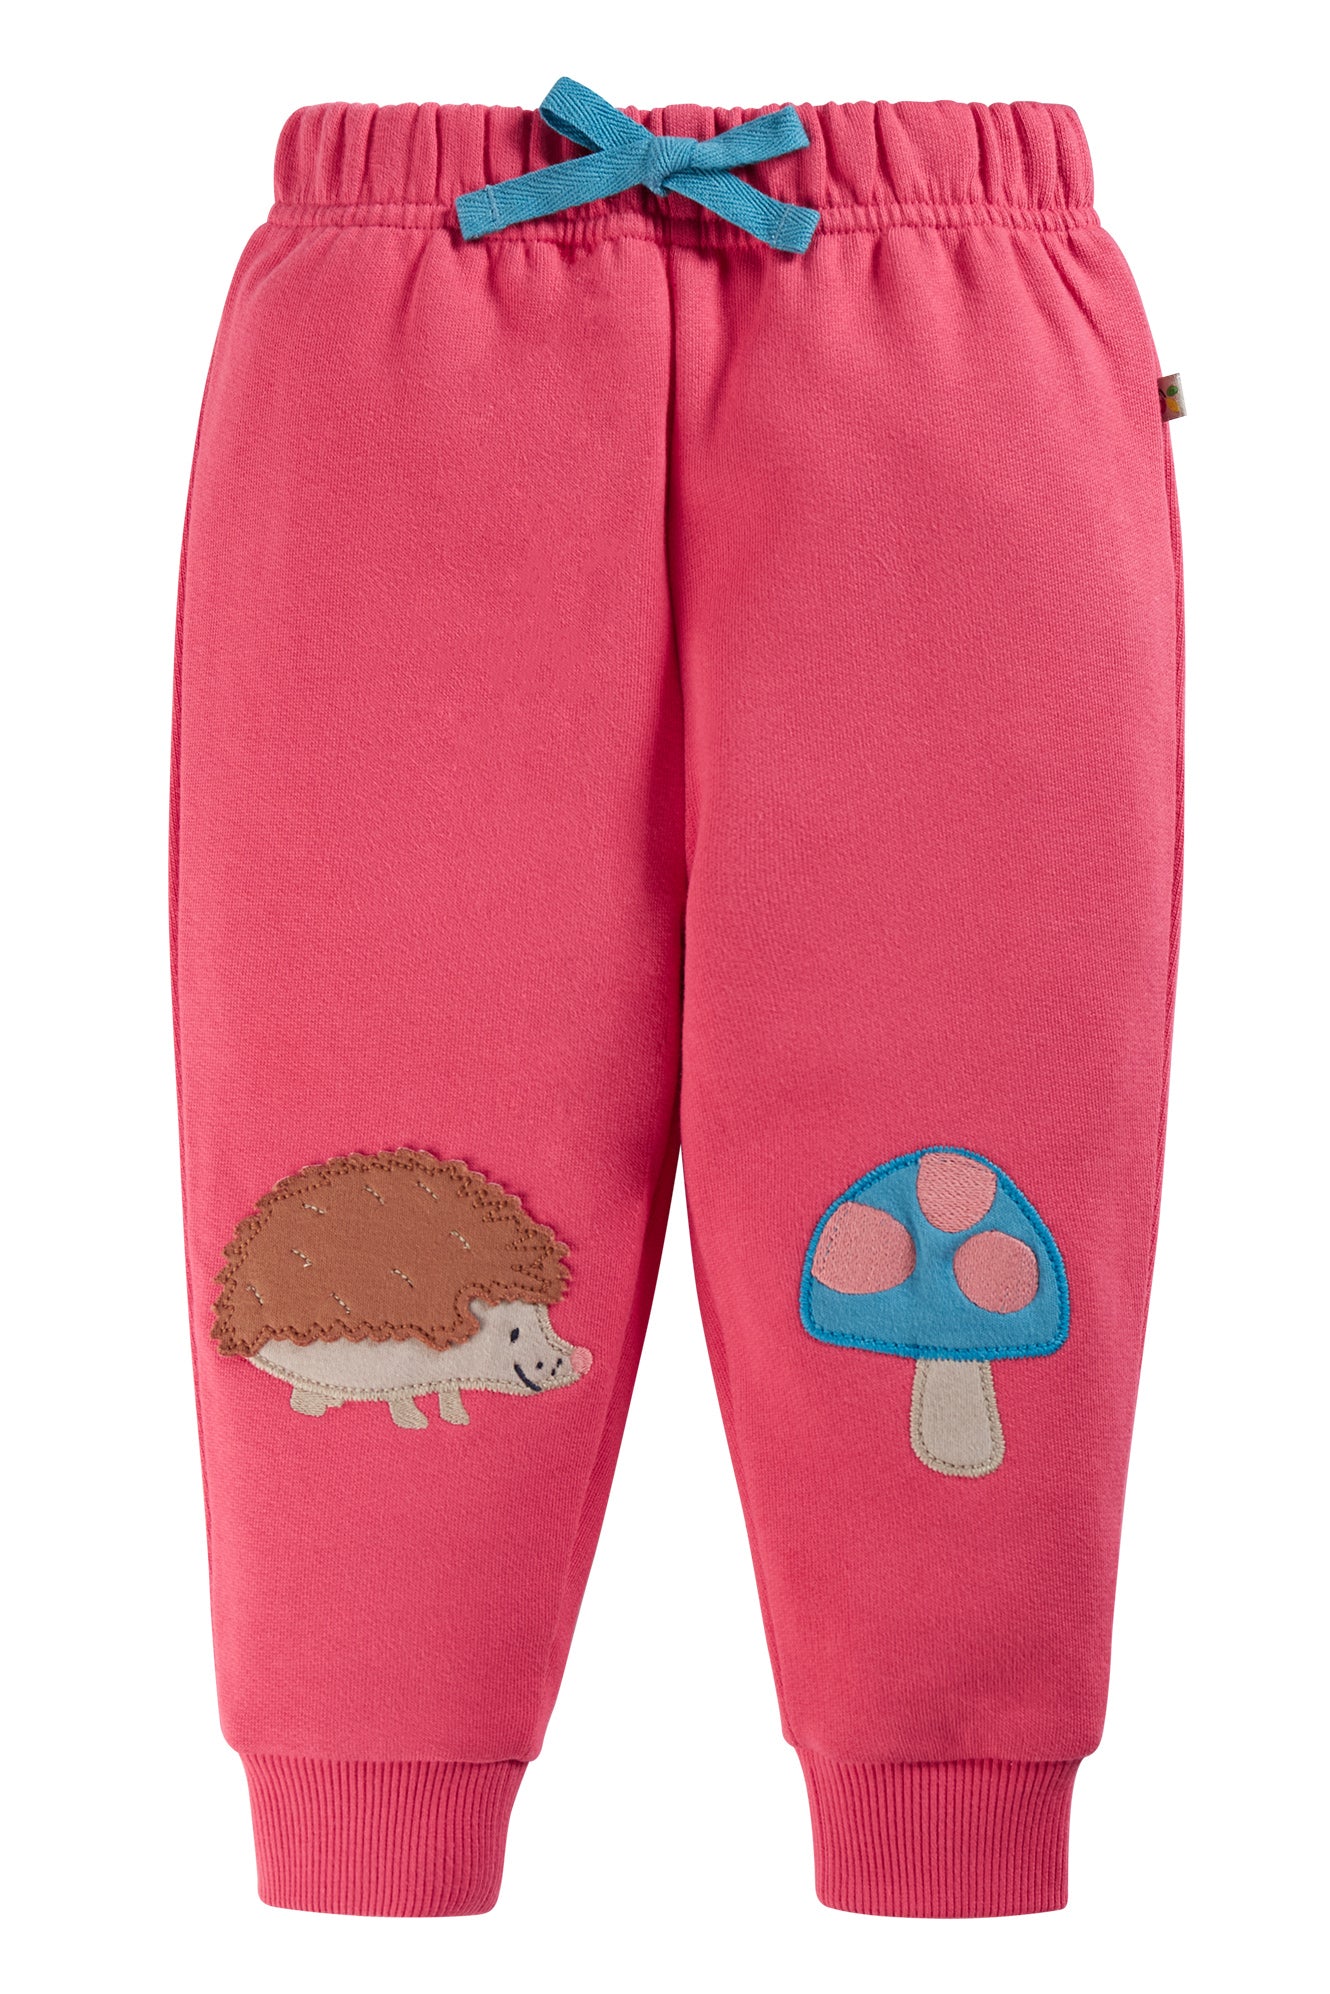 Honeysuckle / Hedgehog | Switch Character Crawlers | Baby & Toddler Bottoms | GOTS Organic Cotton